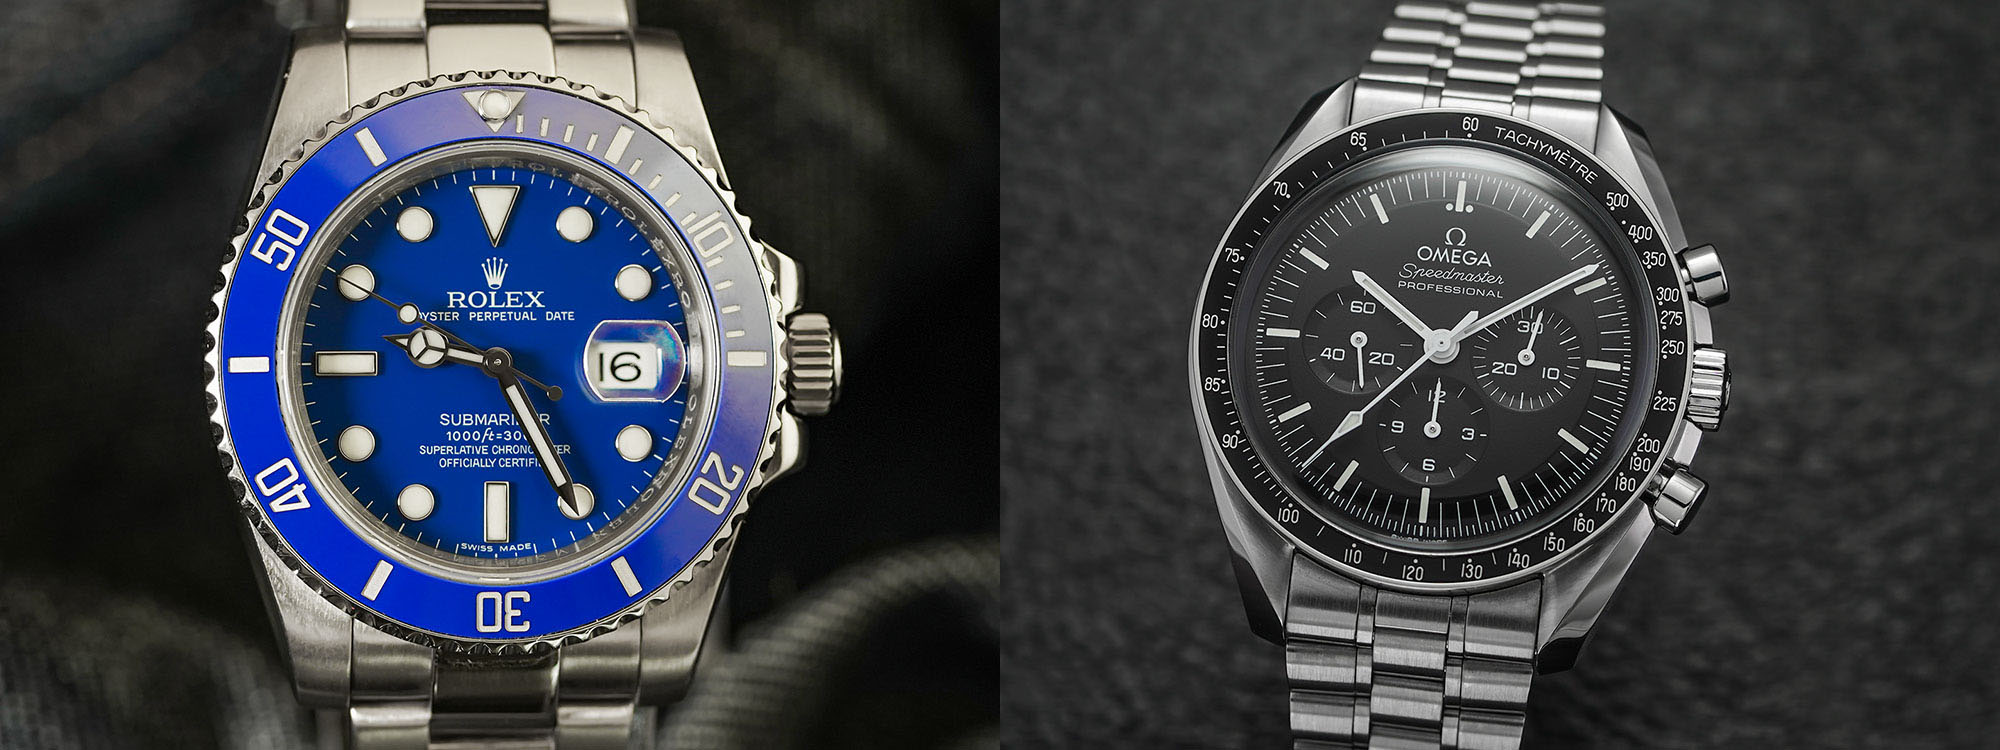 Rolex vs. Omega: A Head-to-Head Historical Matchup of Two Swiss Watch Icons